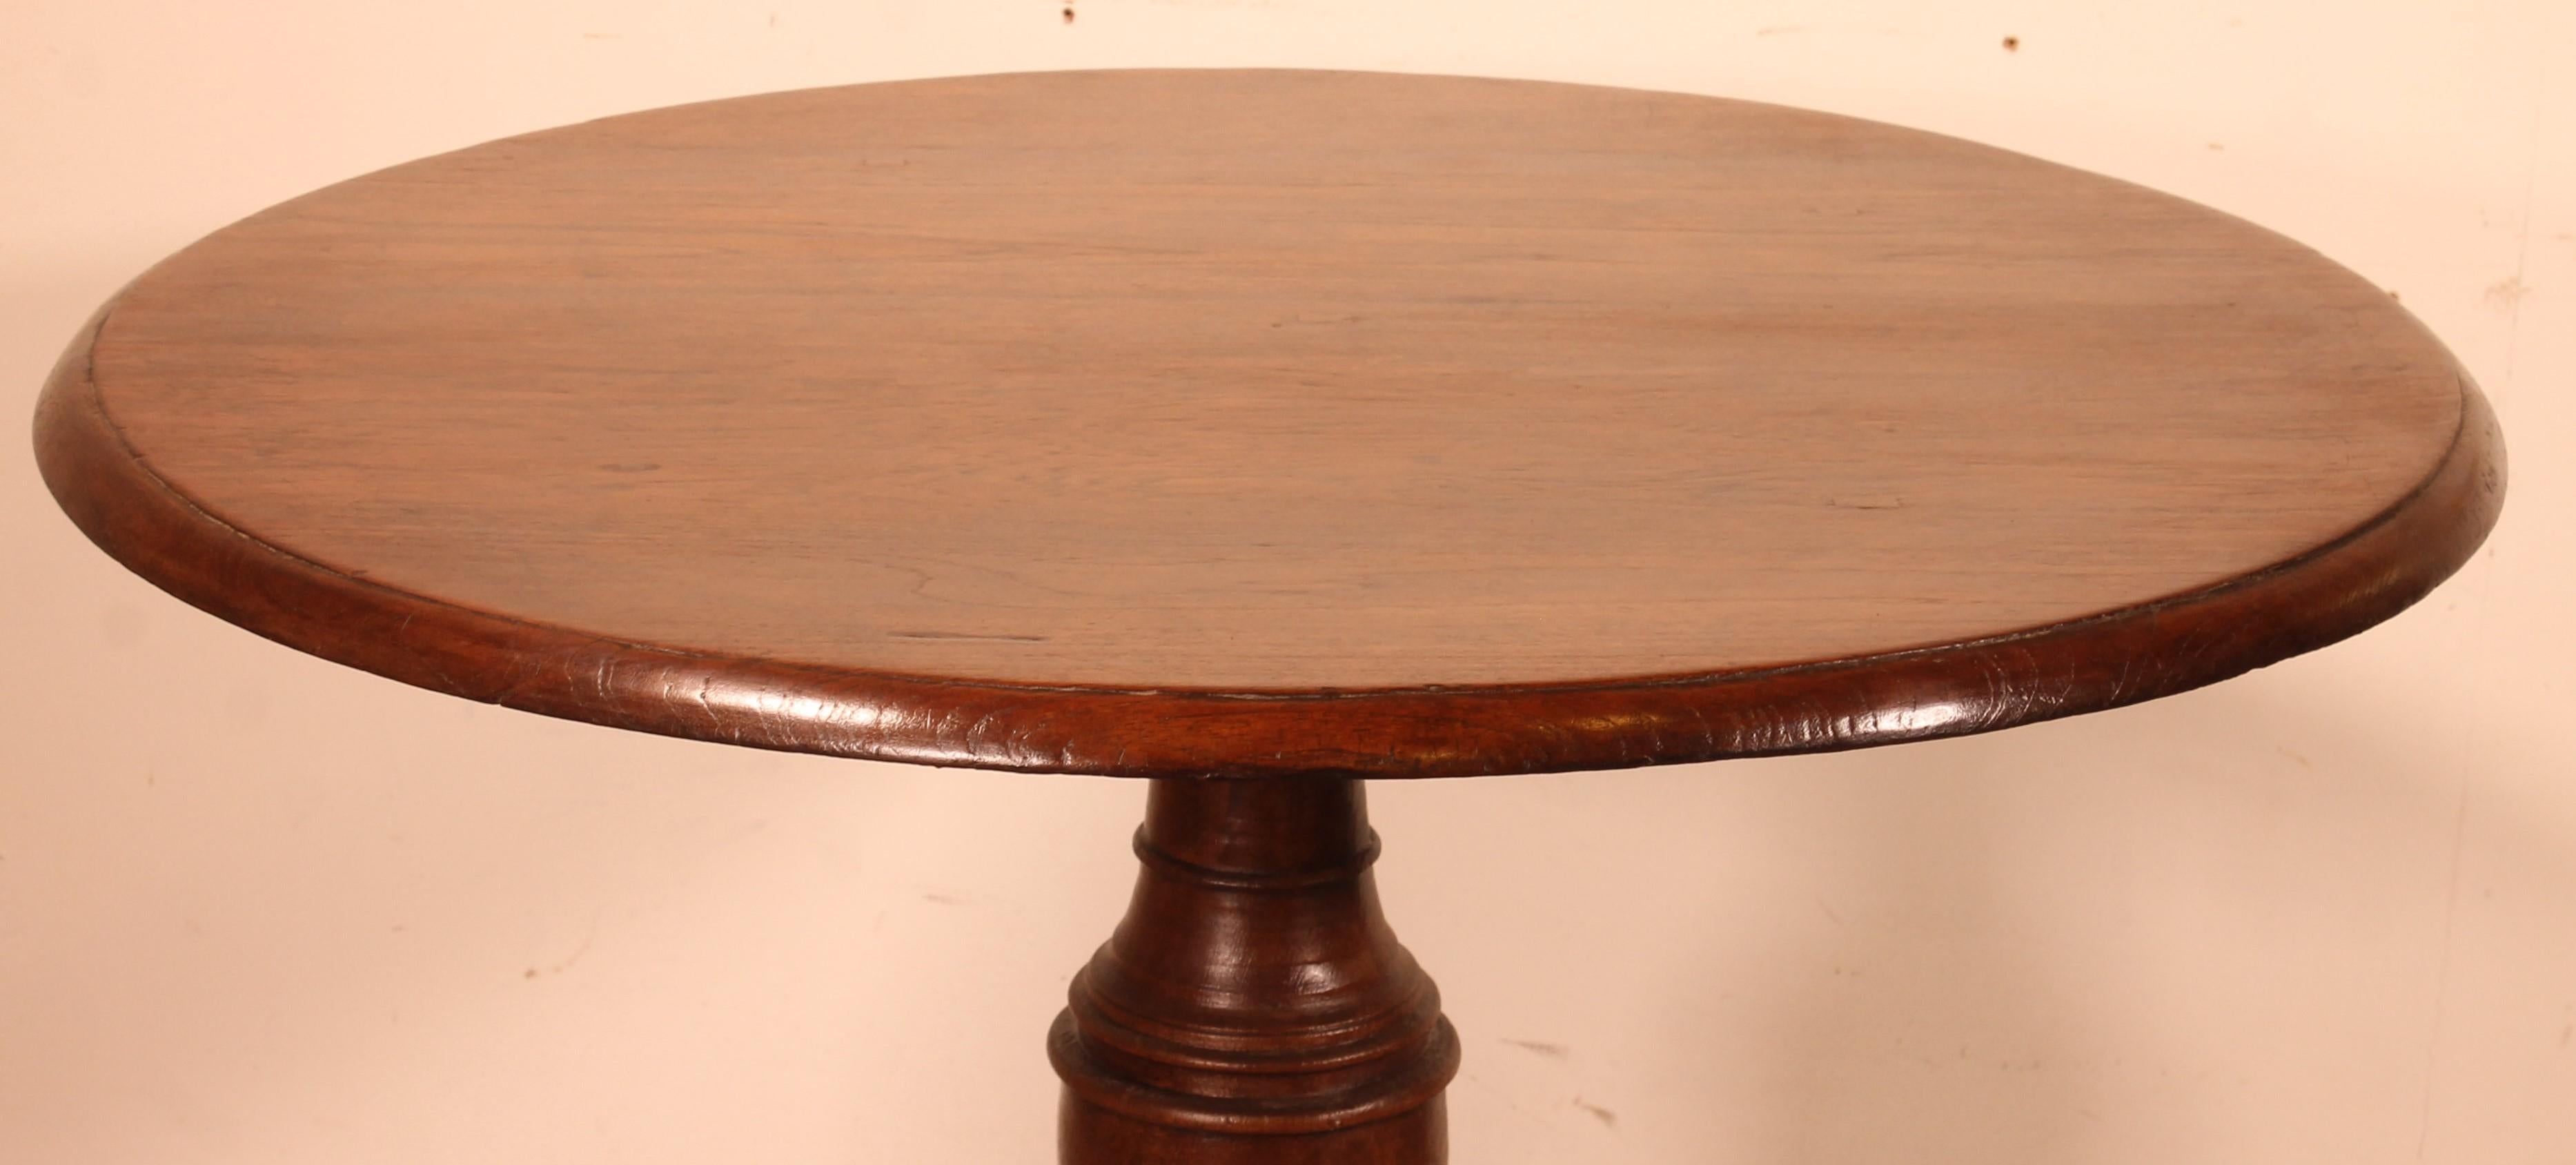 Elegant Portuguese oak pedestal table from the 19th century

Very beautiful center table which with its rustic side stands out from the usual pedestal tables
Very beautiful one-piece top with a corbin beak
It rests on a tripod base

Very beautiful